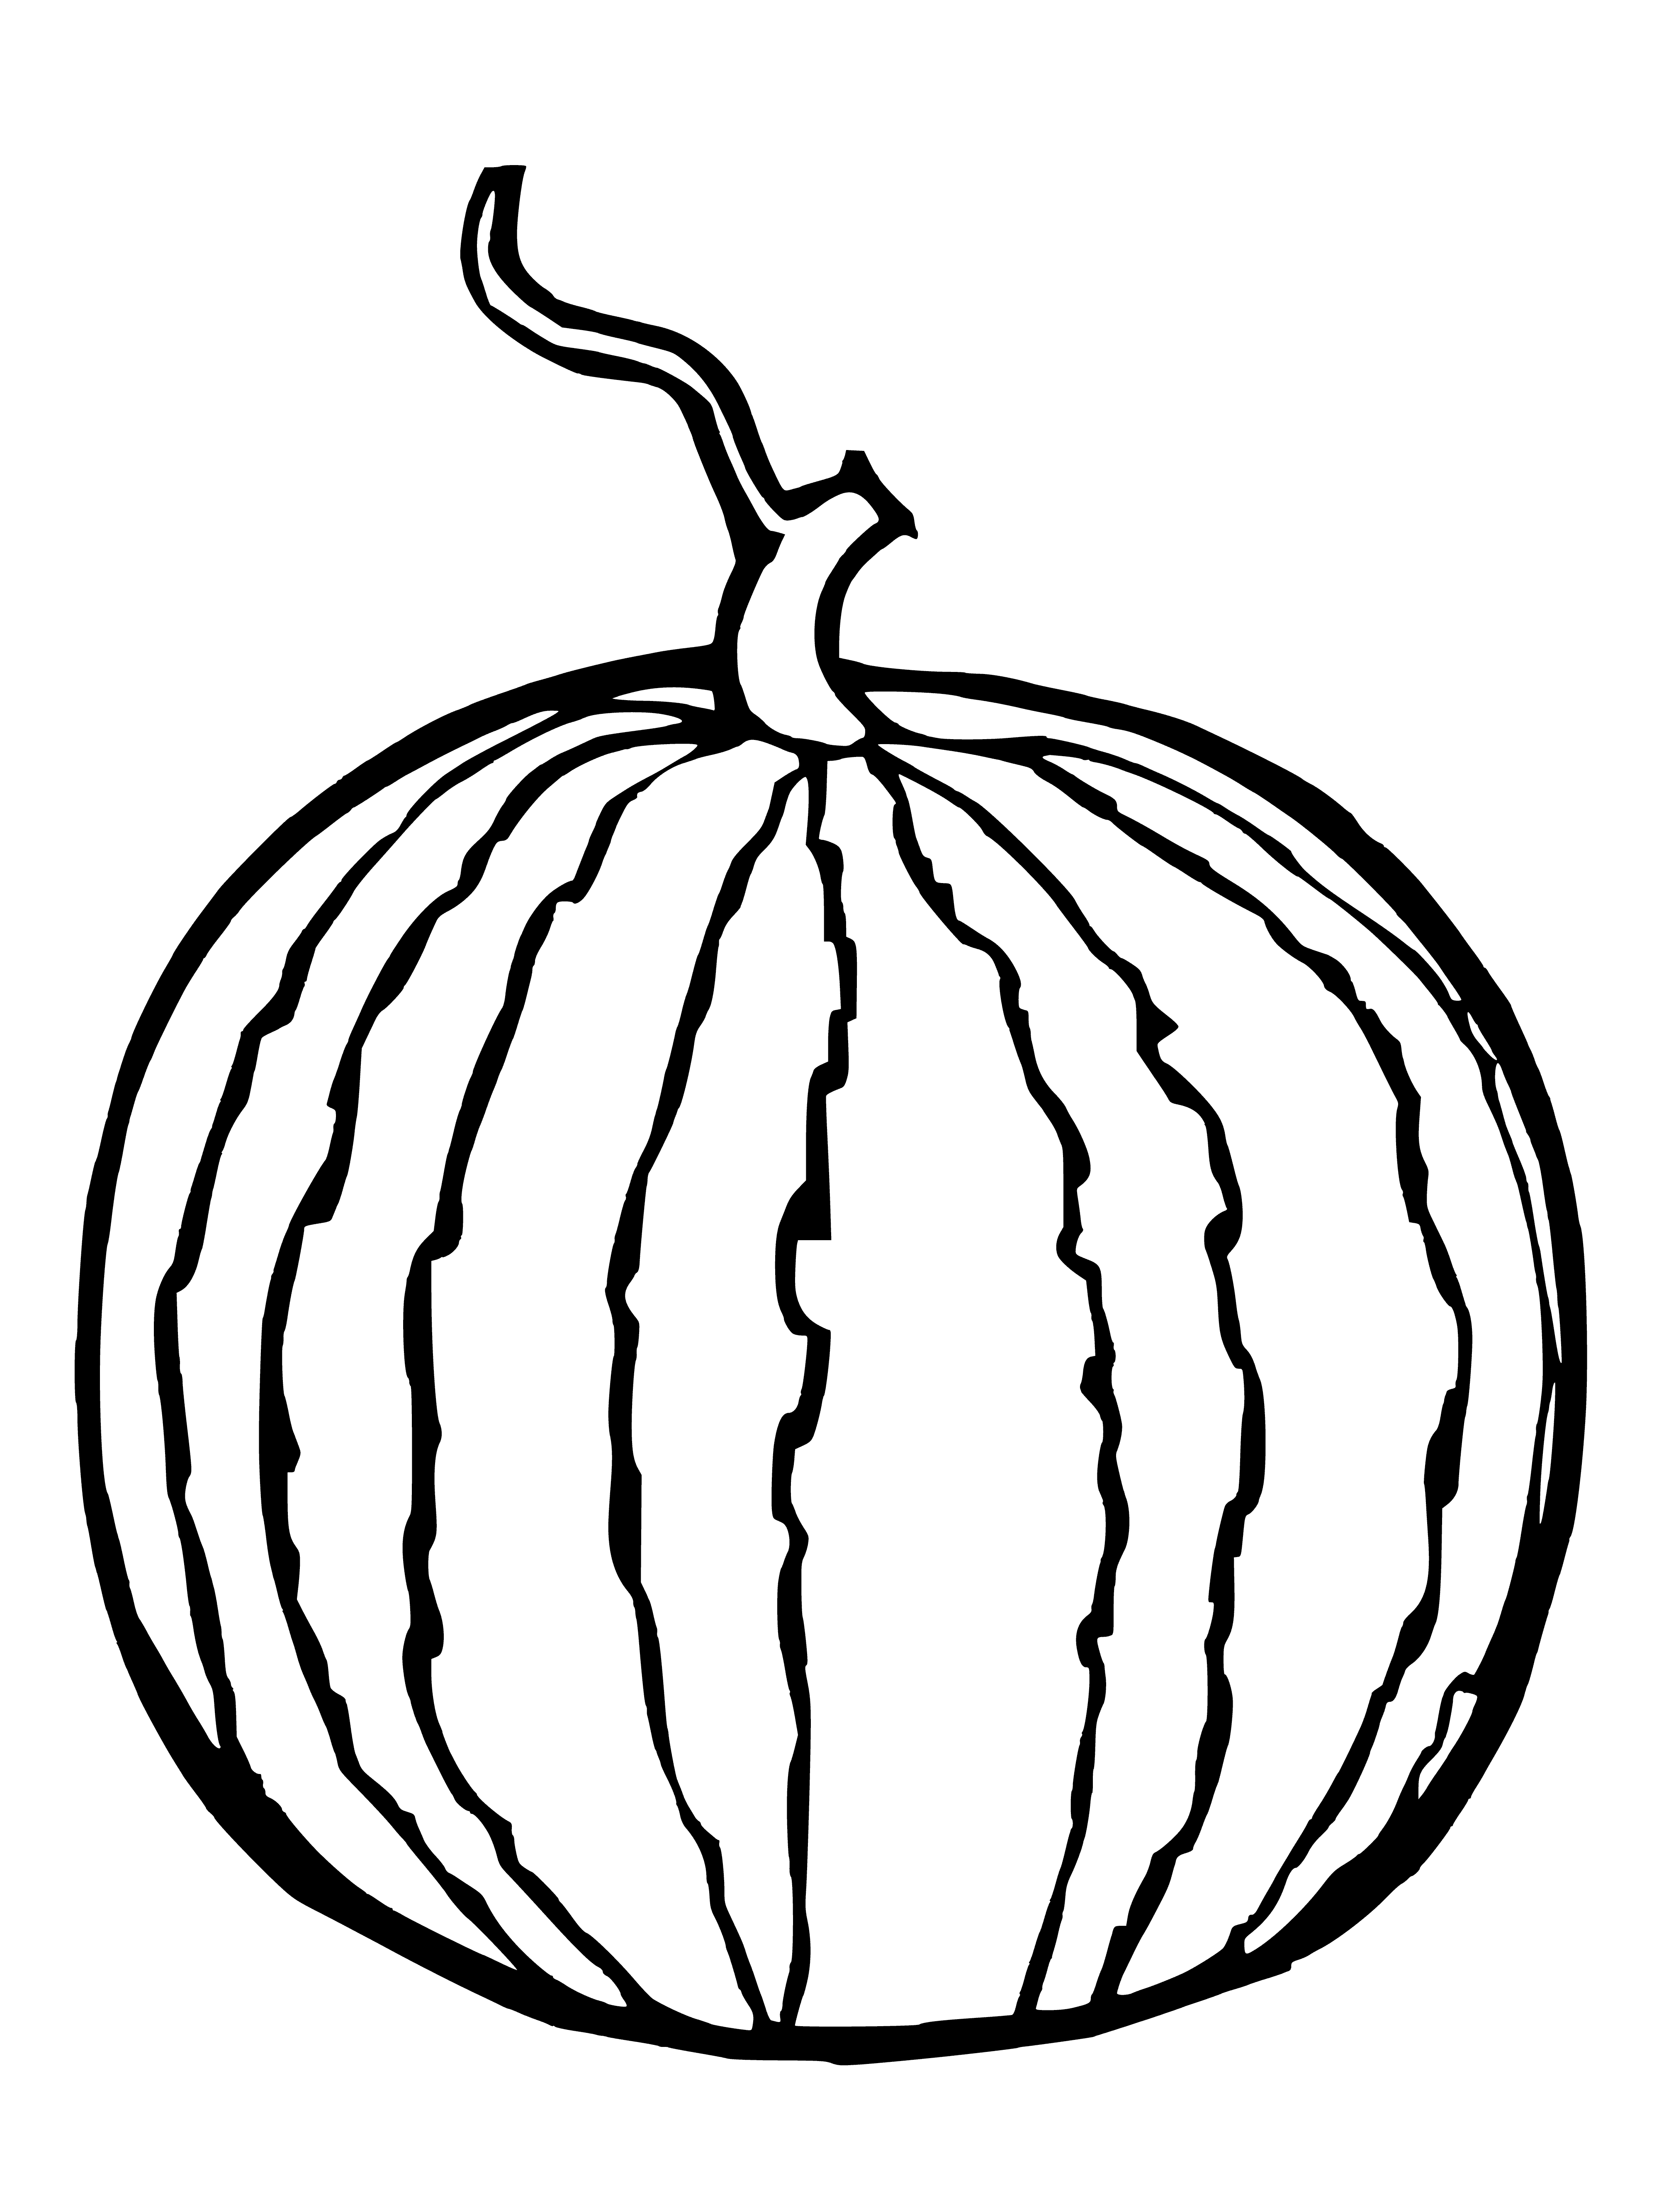 coloring page: Round, green watermelon w/ red interior, thin white rind & black edible seeds.